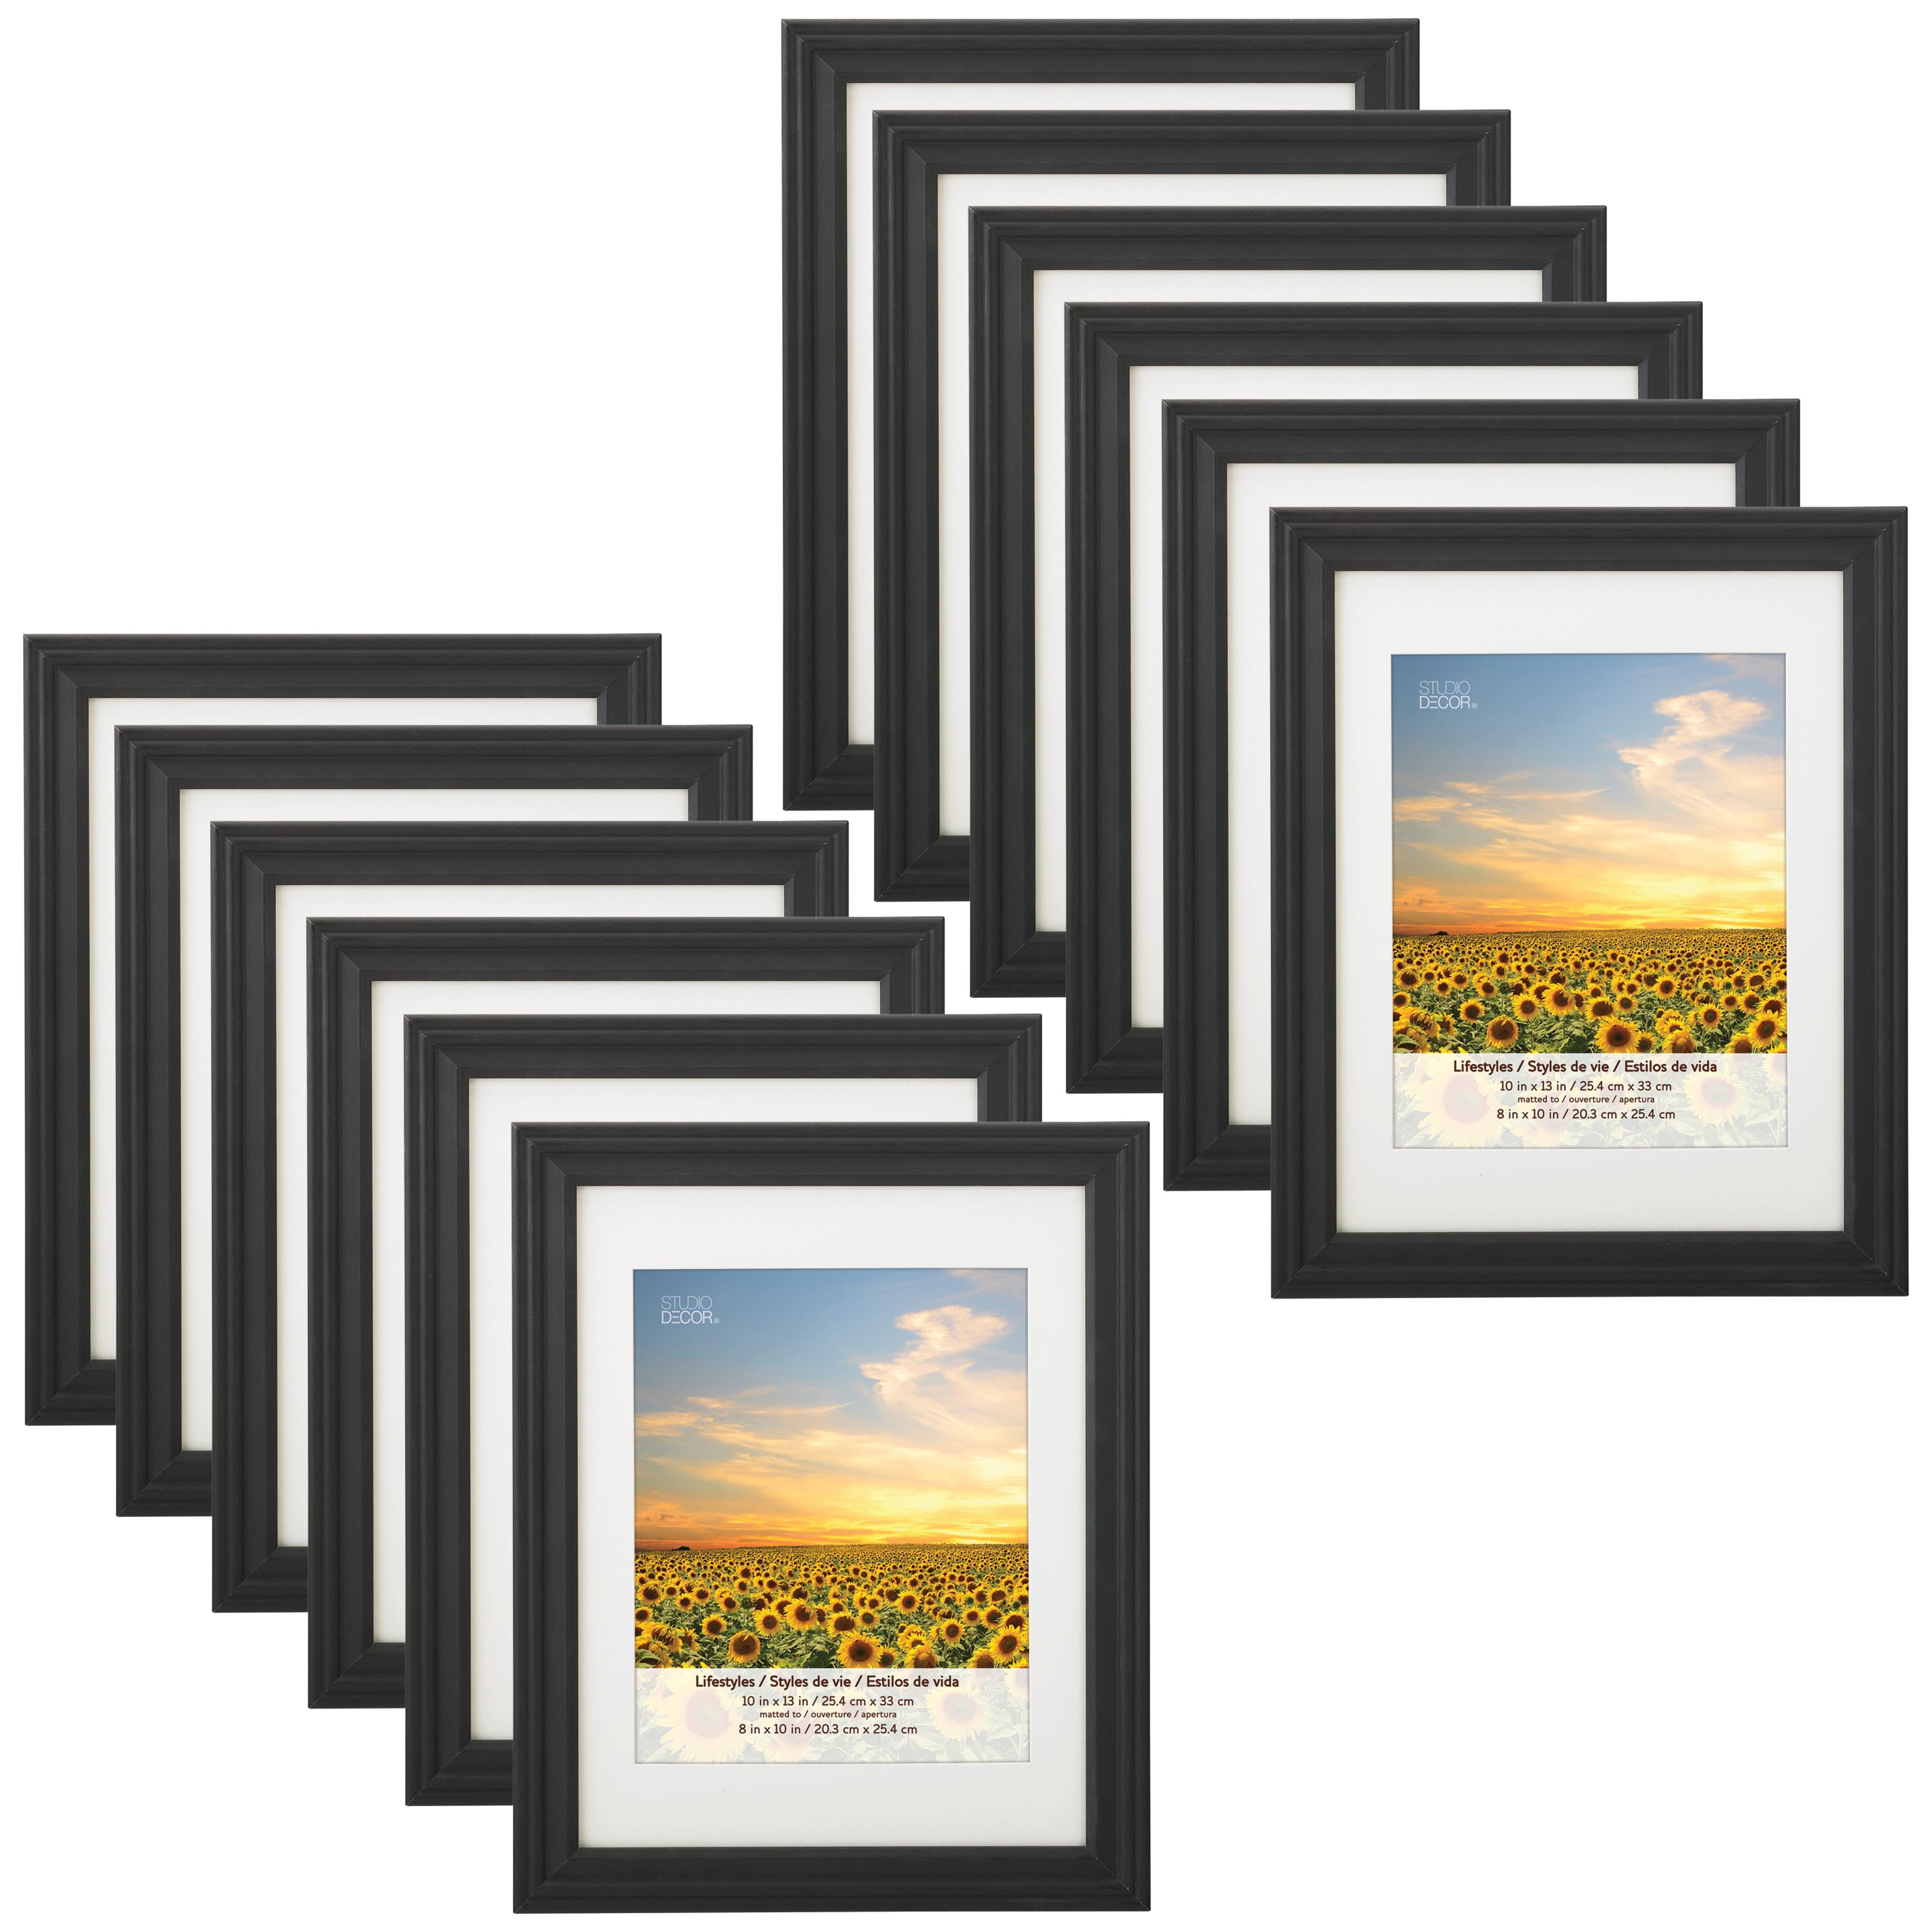 8x10 Matte Black Frame with Glass & Gray/Black Mat for 4x6